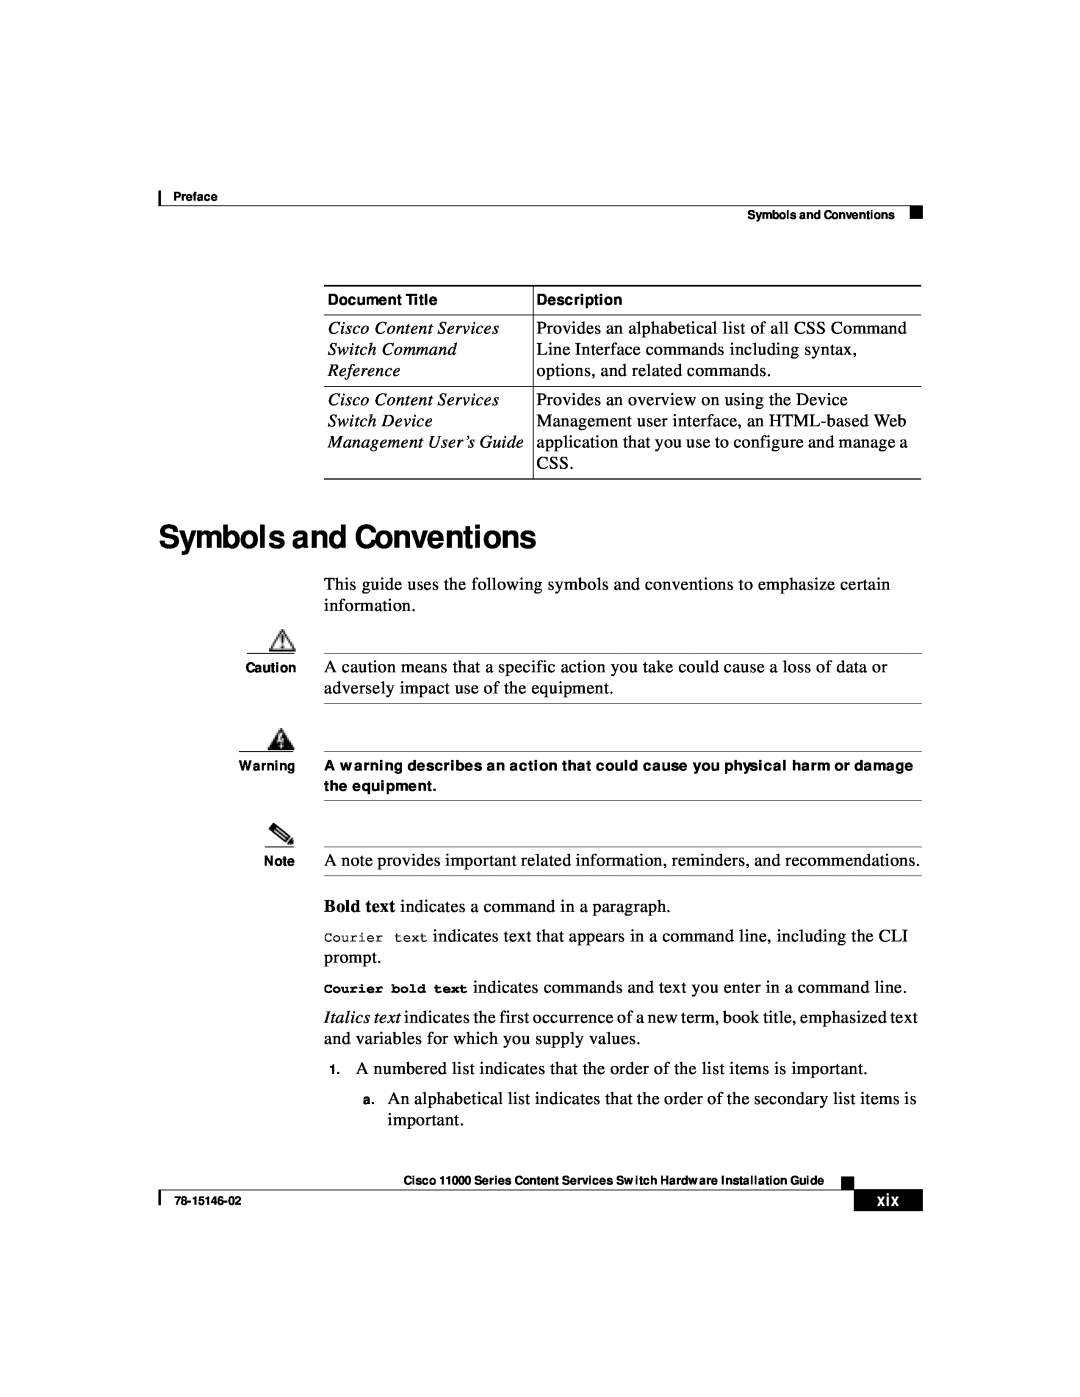 Cisco Systems 11000 Series manual Symbols and Conventions, Document Title, Description 